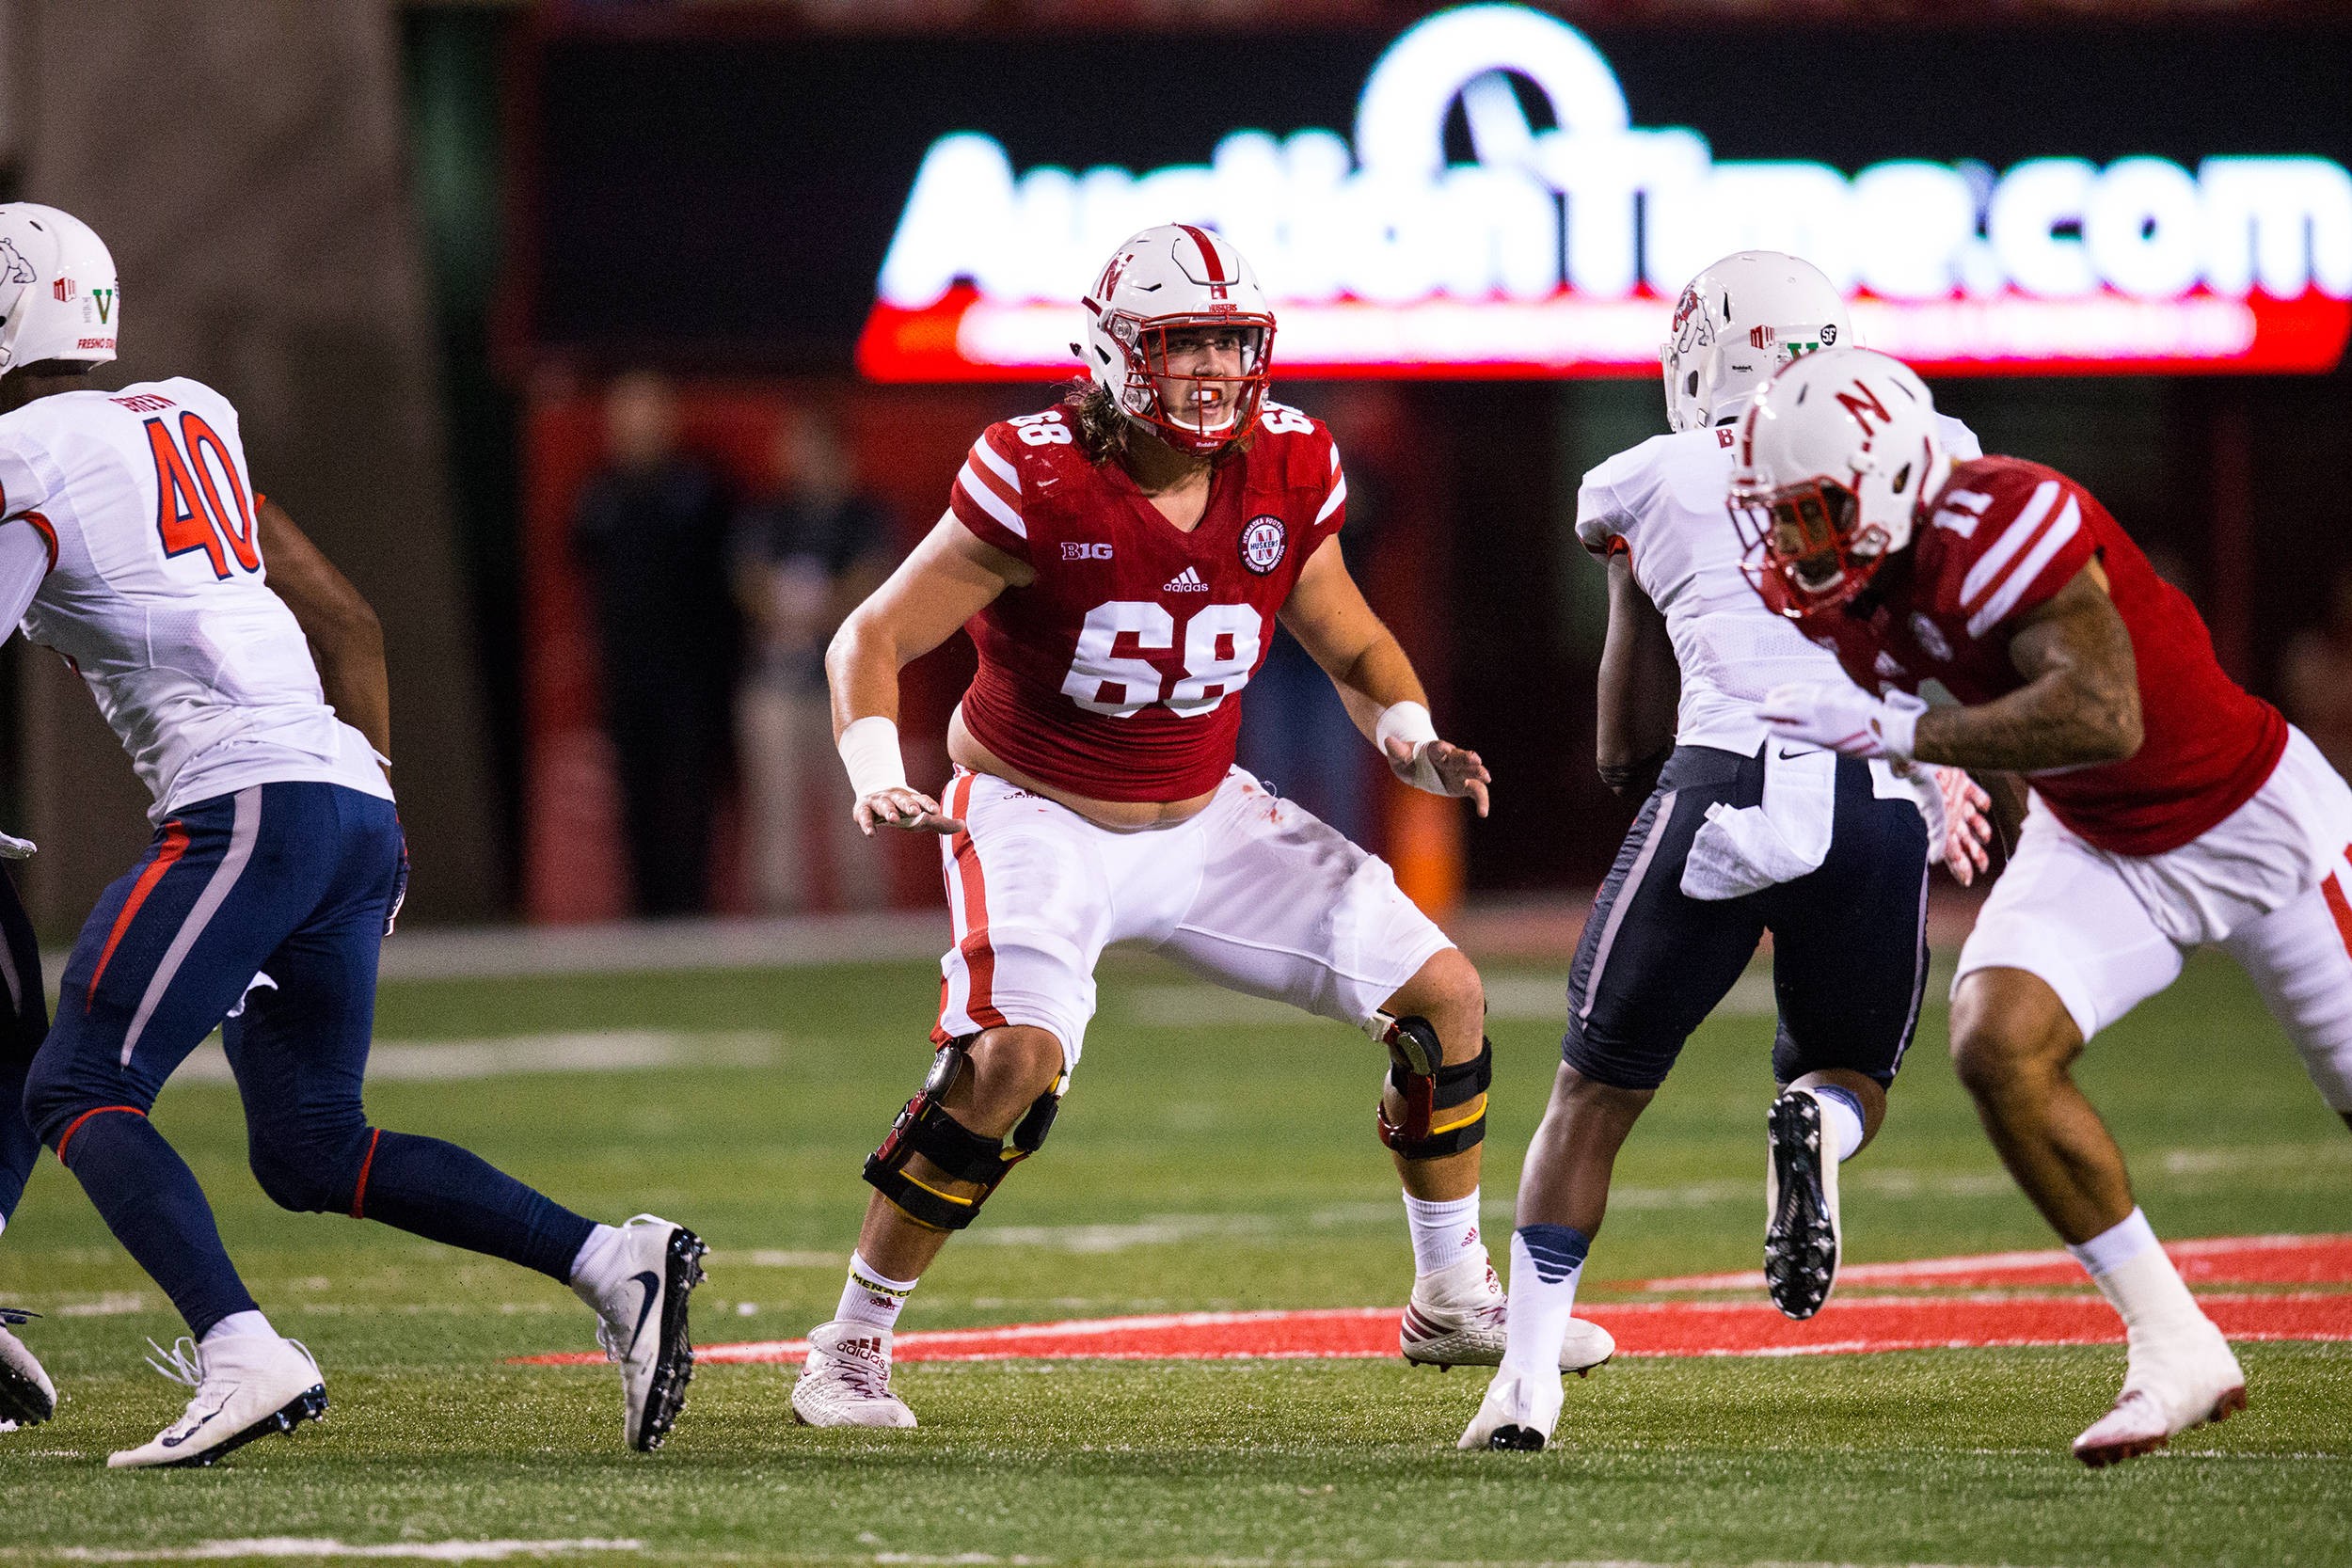 Five Huskers to Participate in NFL Combine